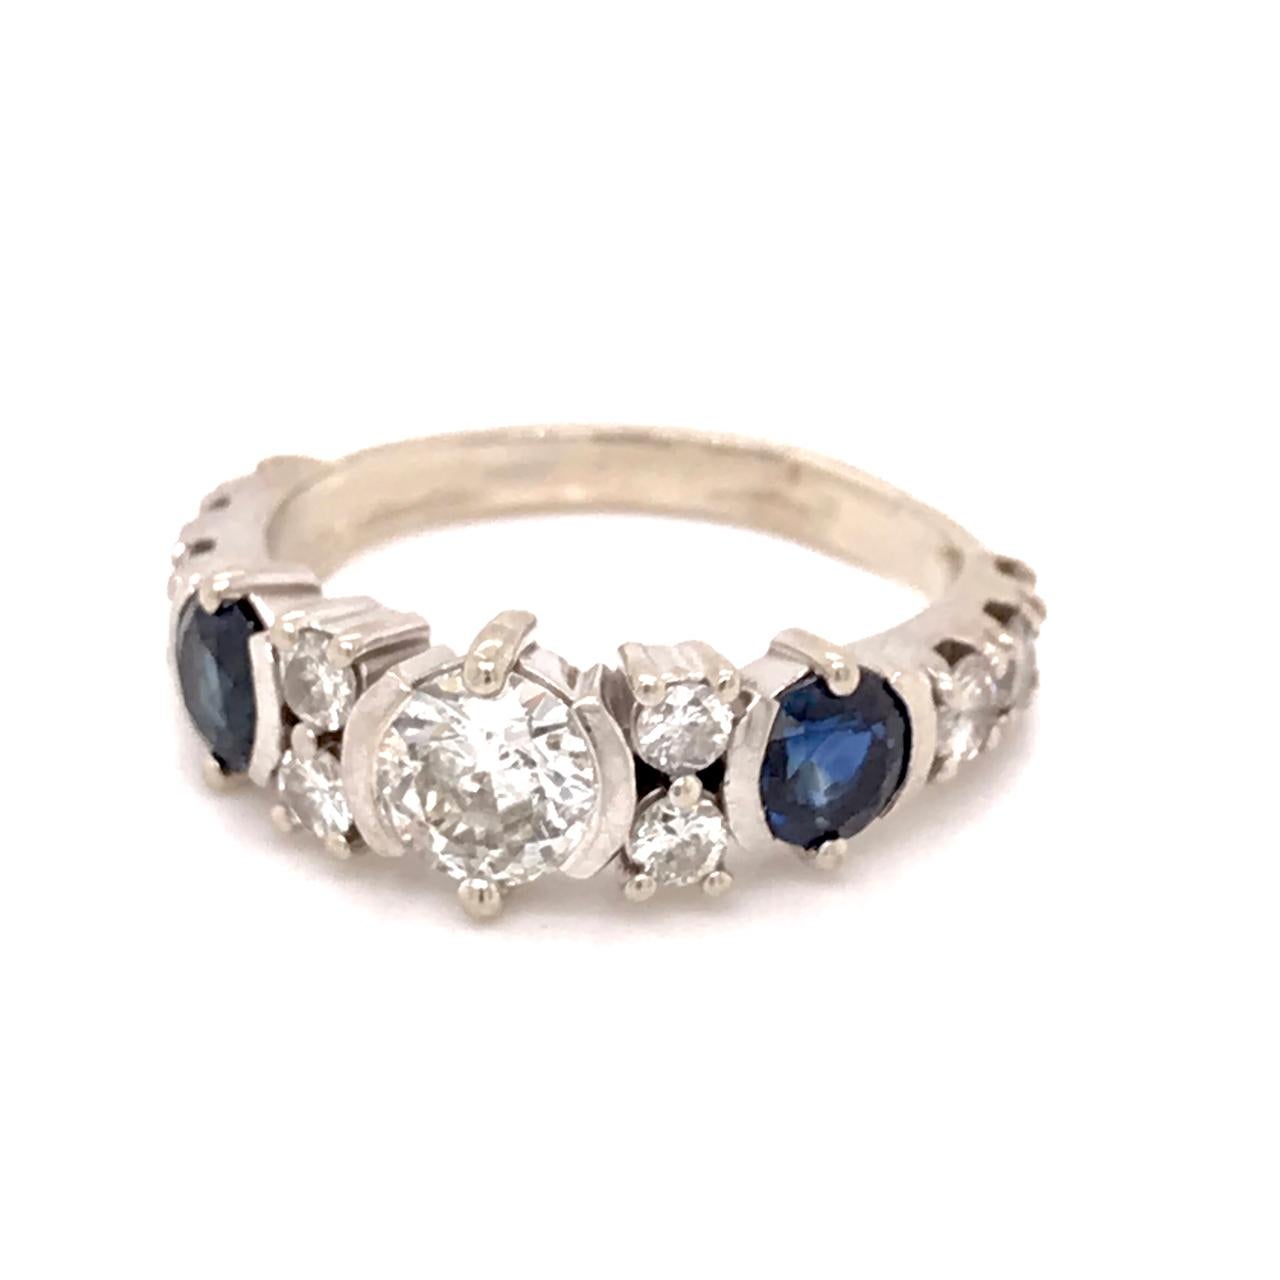 Vintage 14k White Gold, Diamond, & Sapphire Art Deco Style Cocktail Ring For Sale 6